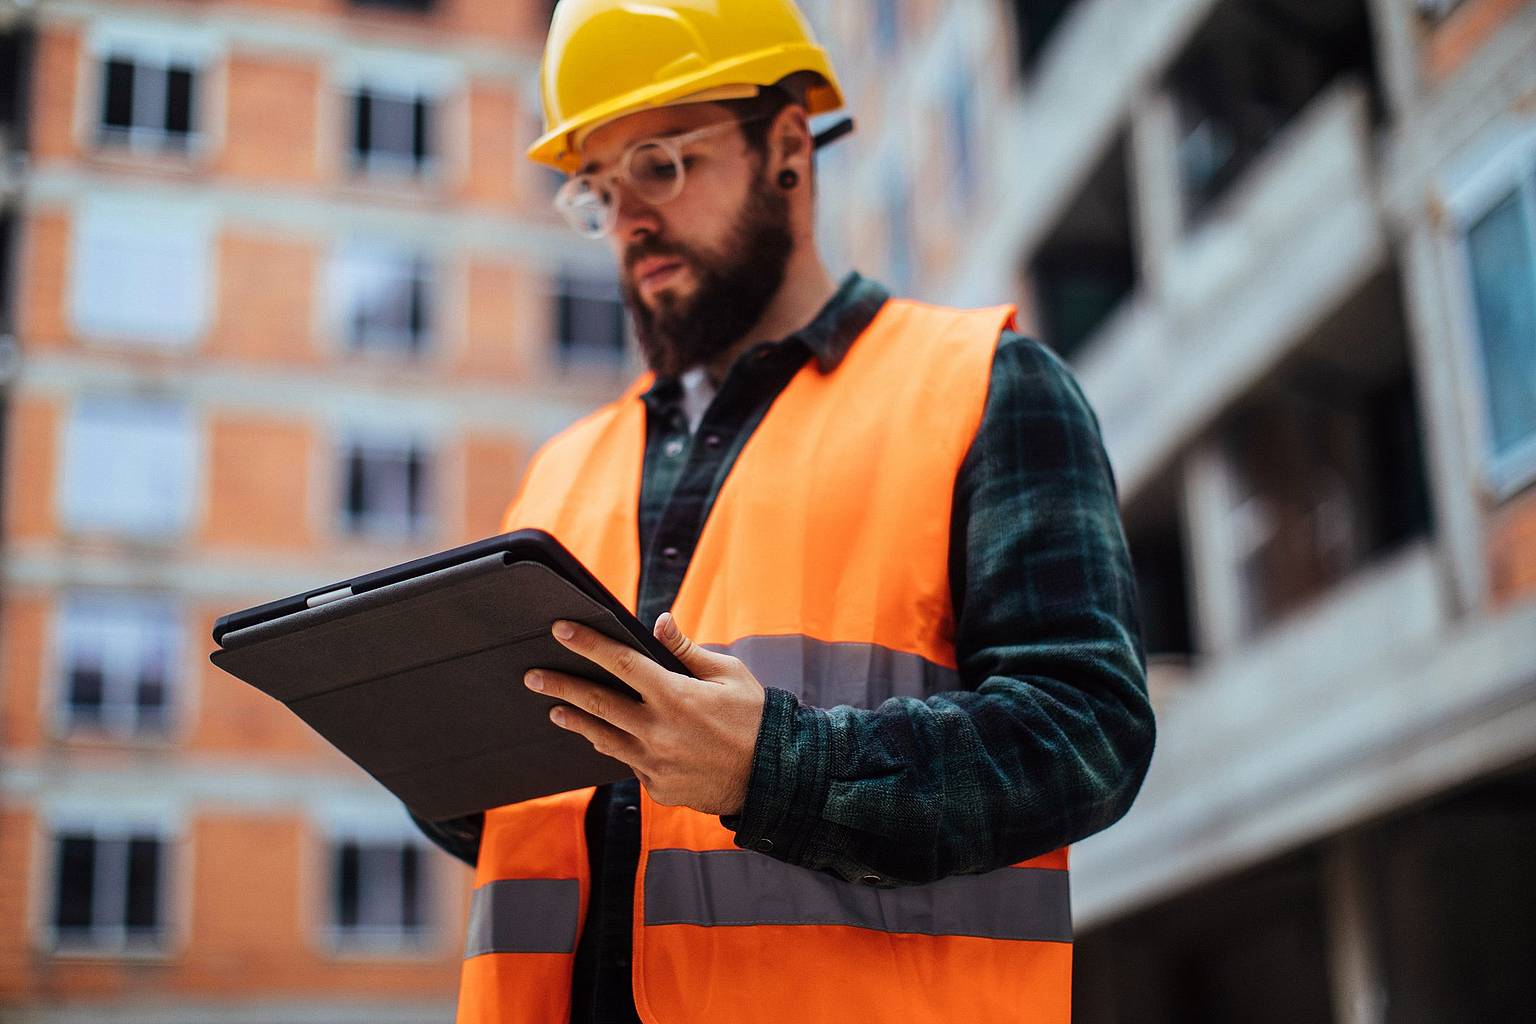 A construction working reviewing information on a tablet.